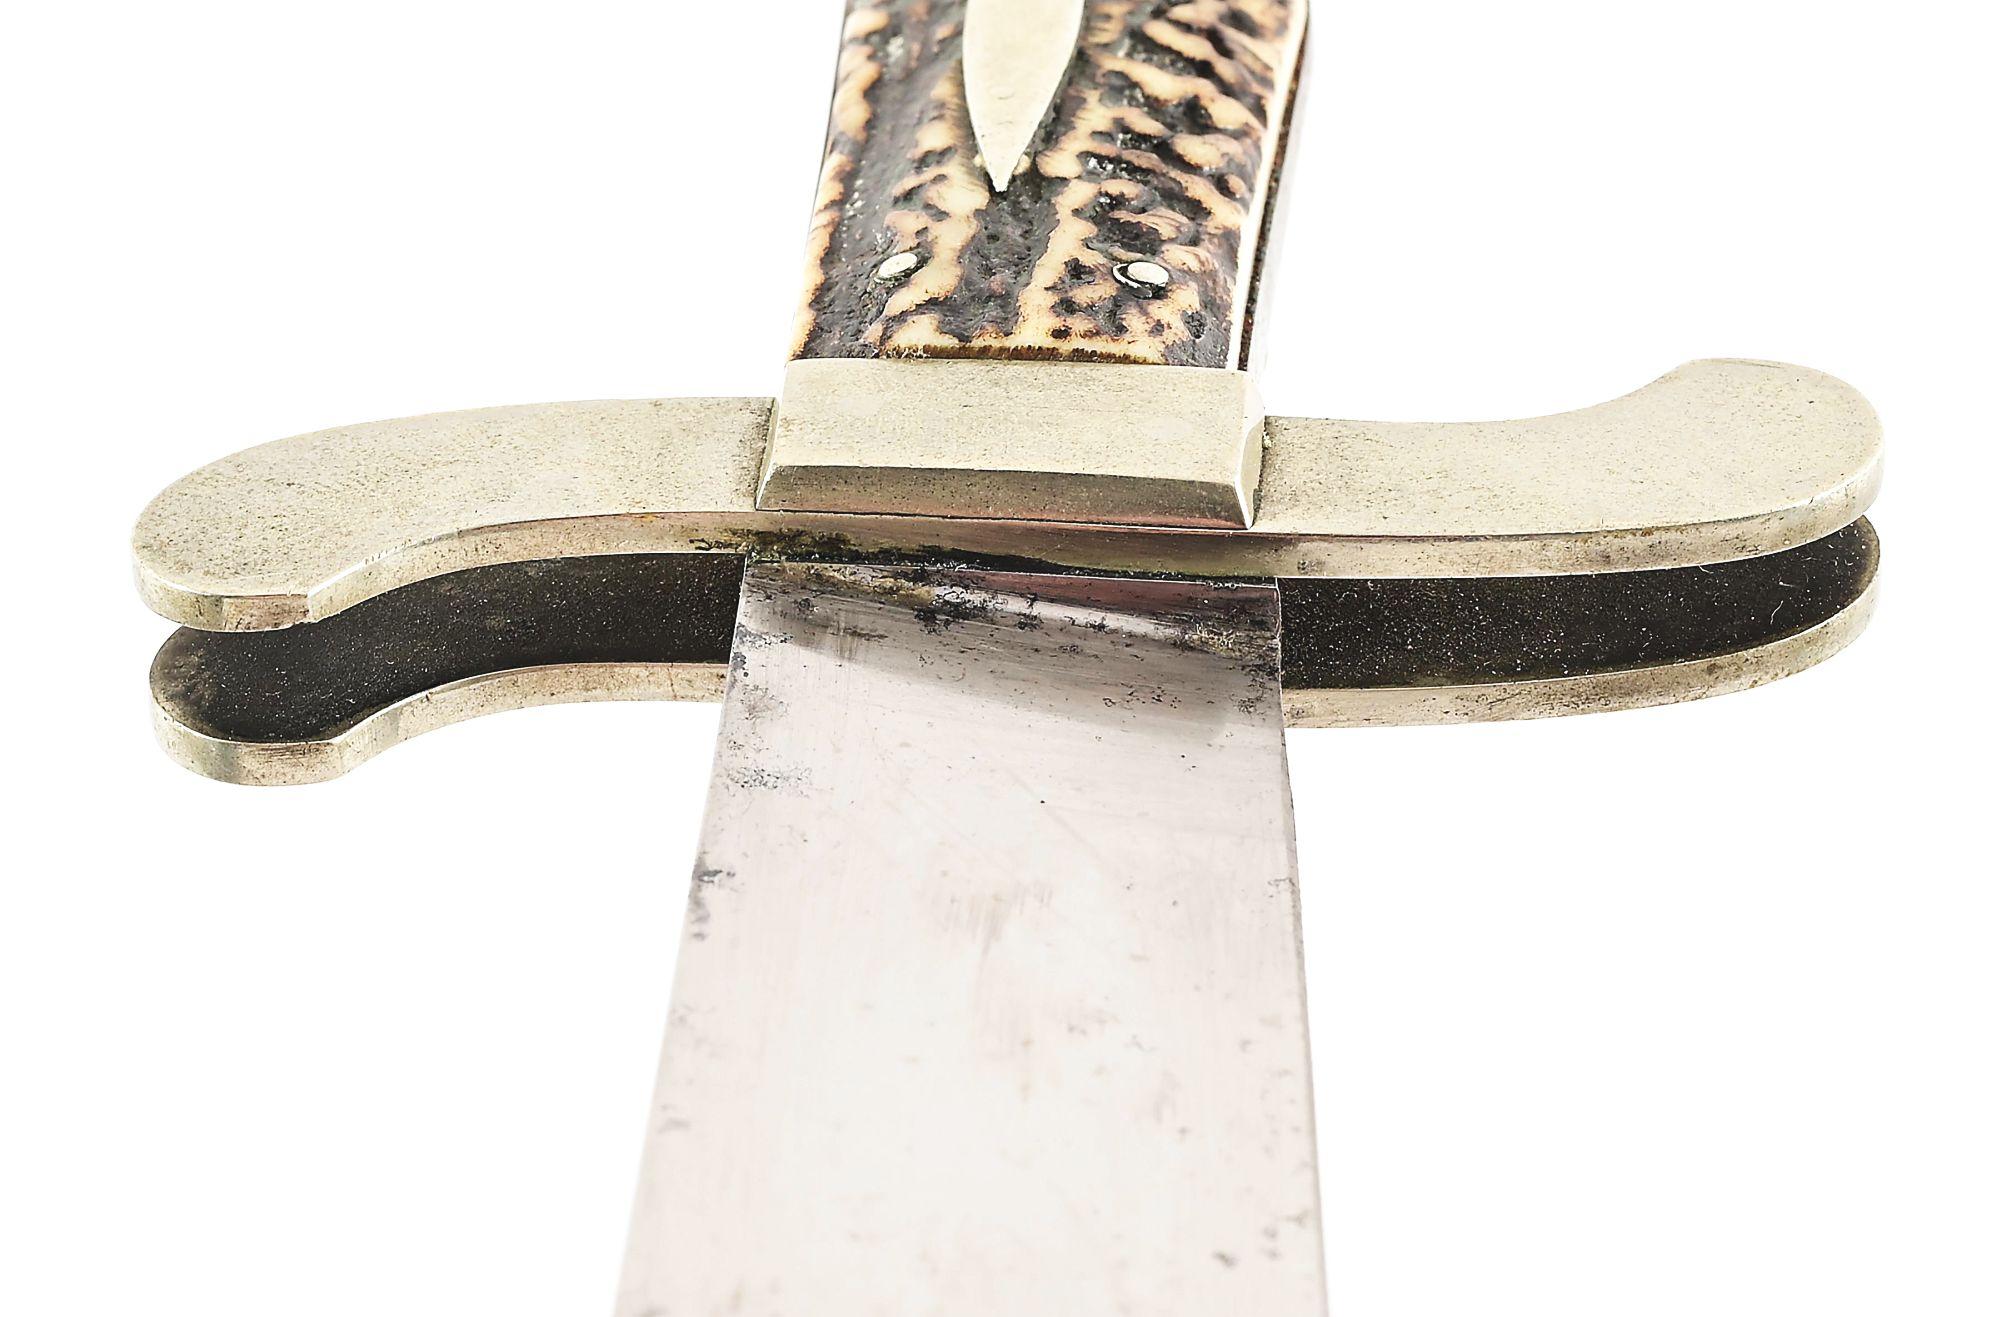 LARGE BOWIE KNIFE BY SAMUEL WRAGG.